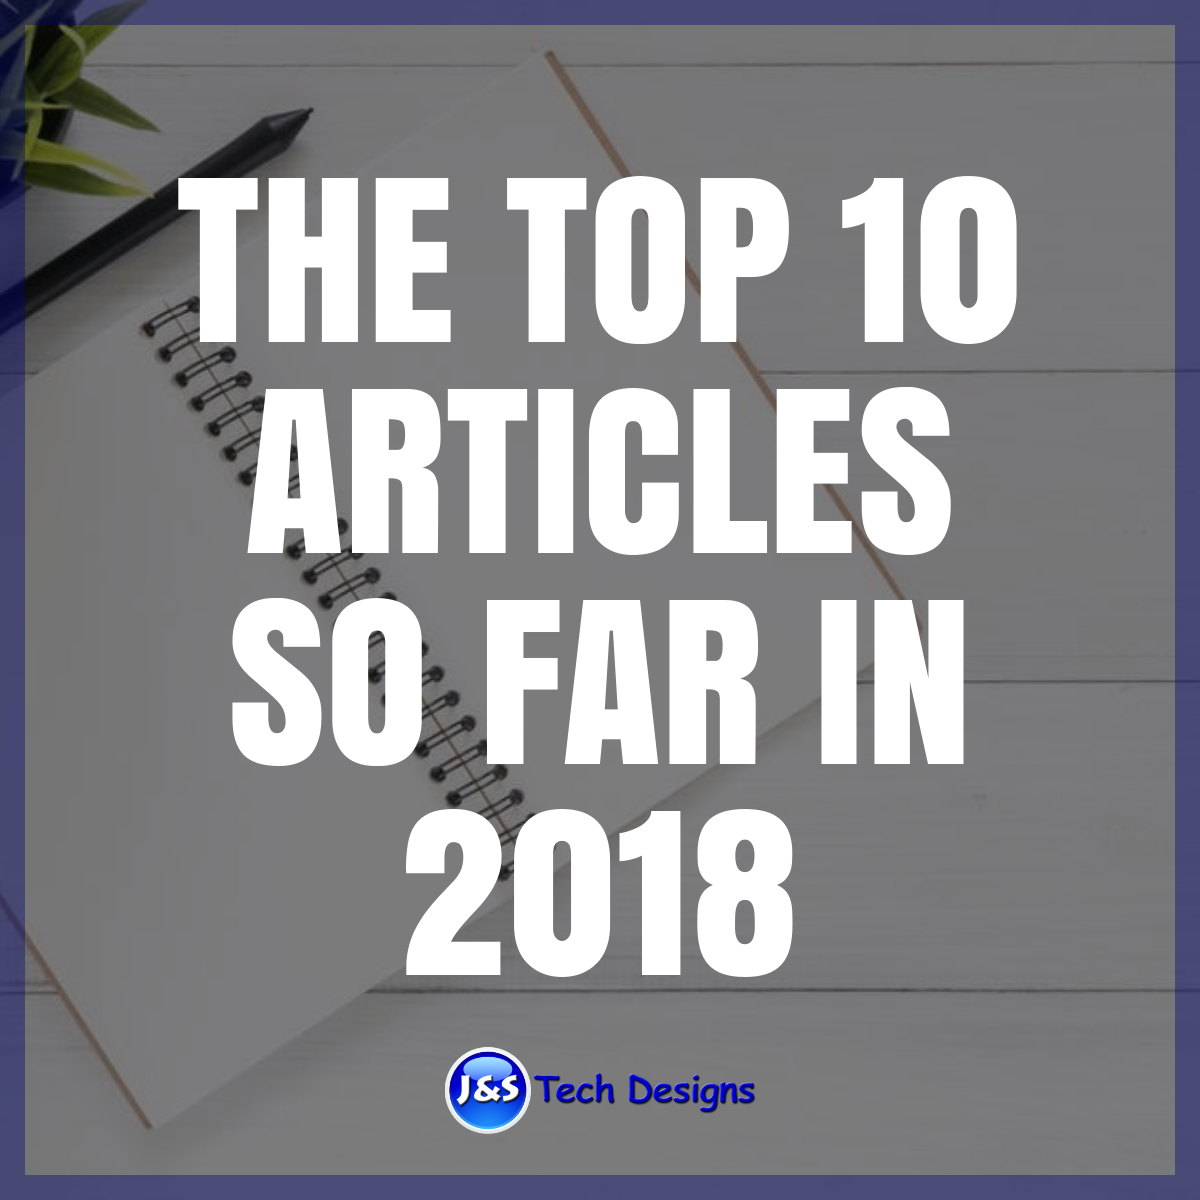 The Top 10 Articles so far in 2018